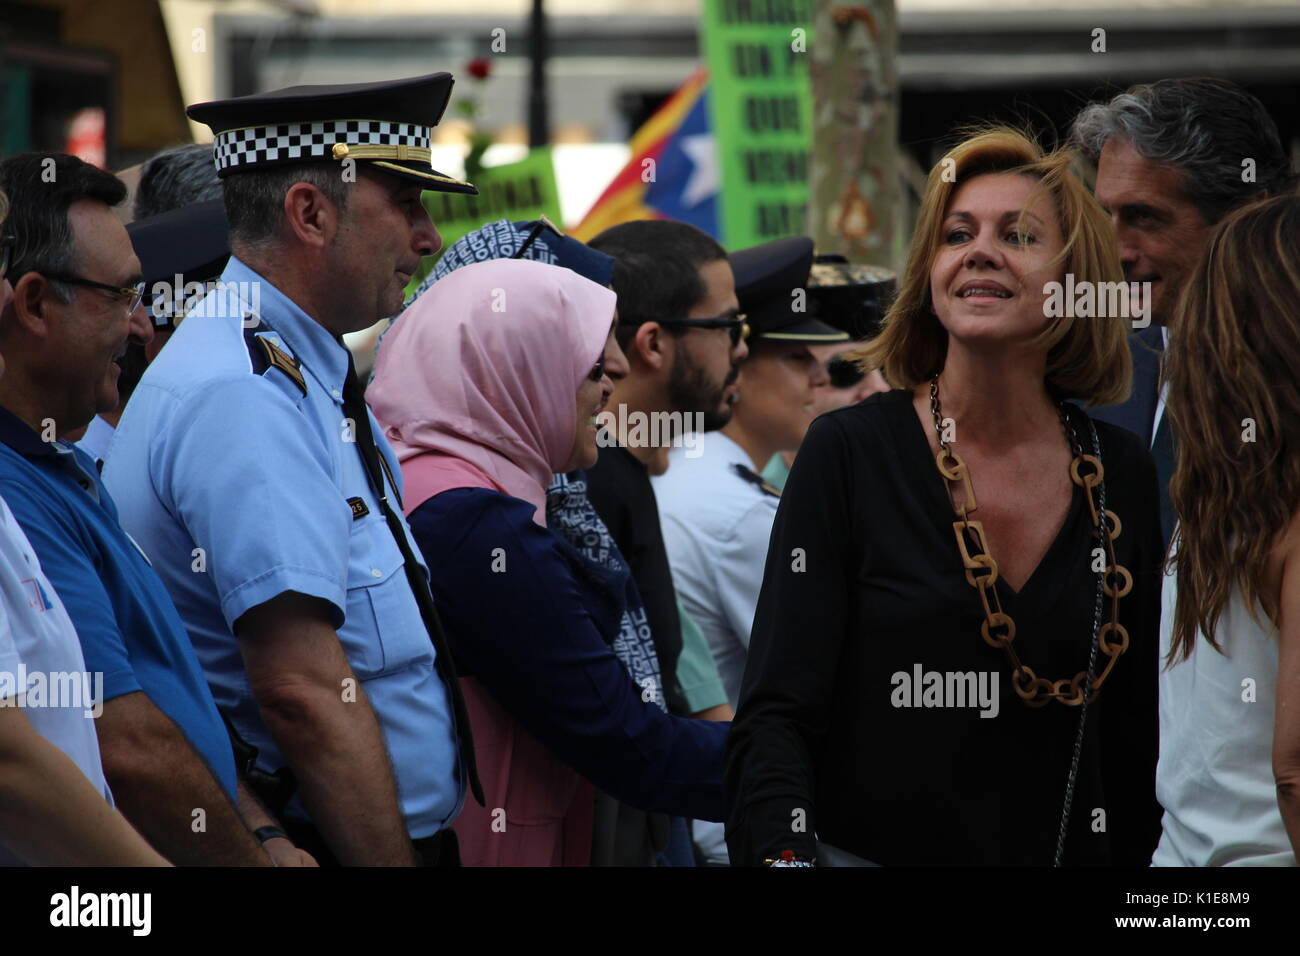 Barcelona, Spain. 26th August, 2017. Spanish ministry of defense Maria Dolores de Cospedal participating at the massive protest 'I am not scared' against terrorism and islamophobia after the attack on Rambla. The head of the manifestation was held by public service servants as firefighters, police, medical emergency services. Amongst the over 500.000 participants there was a huge representation of the spanish authorities and all political parties. Credit: Dino Geromella/Alamy Live News Credit: Dino Geromella/Alamy Live News Stock Photo